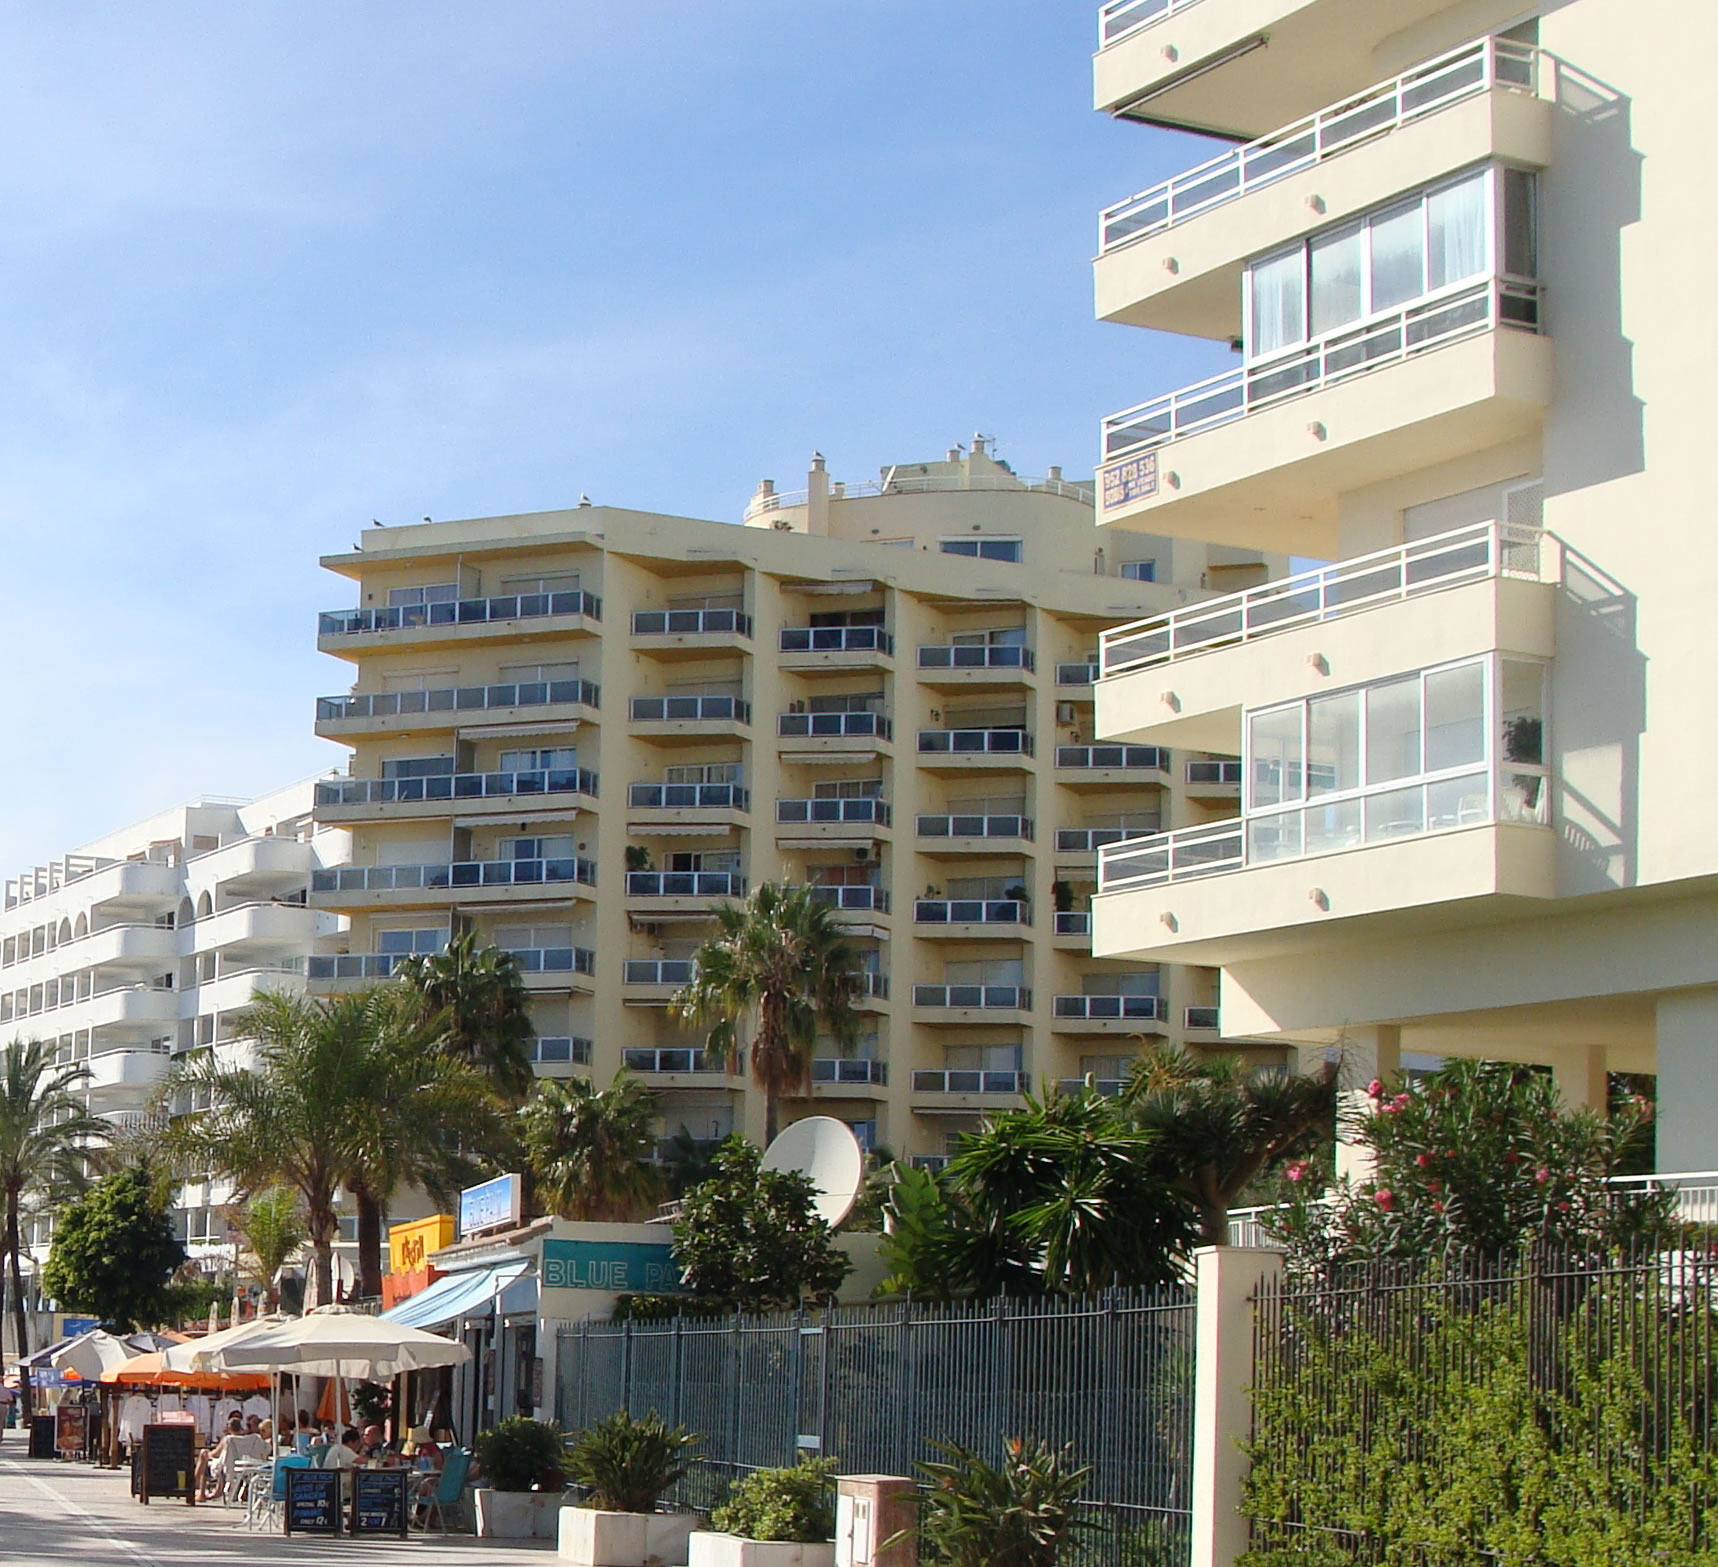 Top Five Reasons to Invest in a Property in Spain’s Costa del Sol